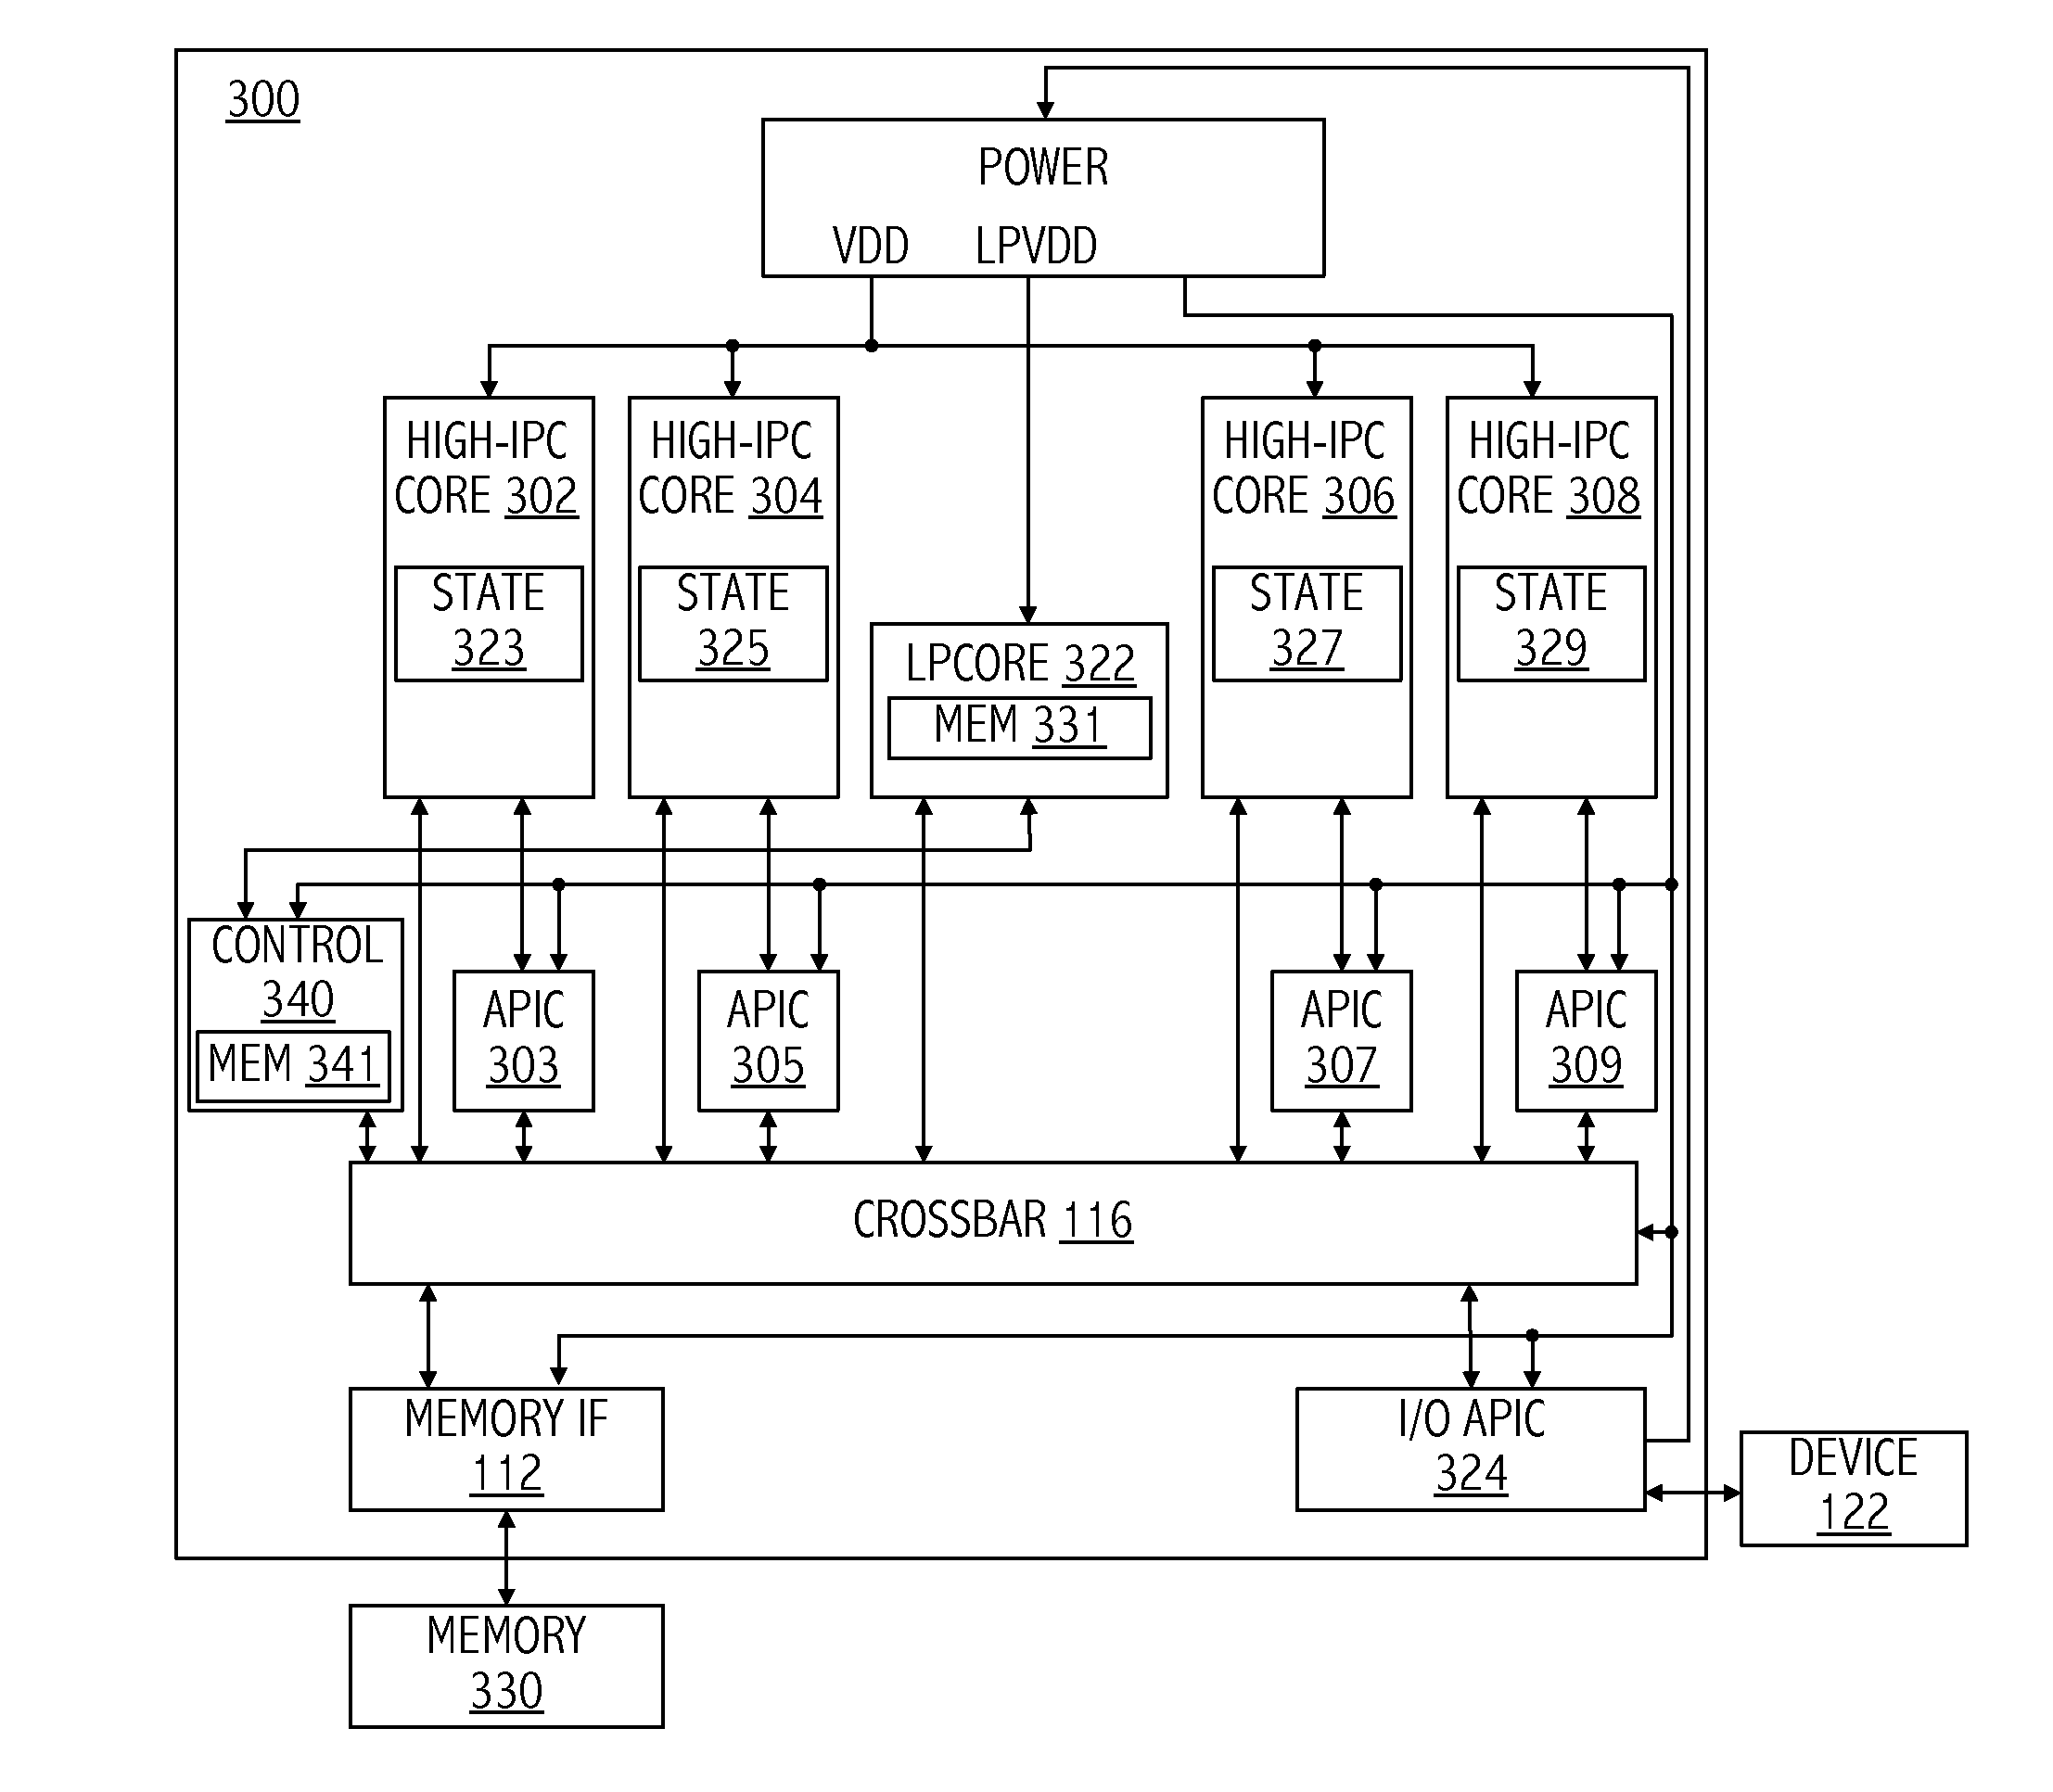 Mechanism for reducing interrupt latency and power consumption using heterogeneous cores